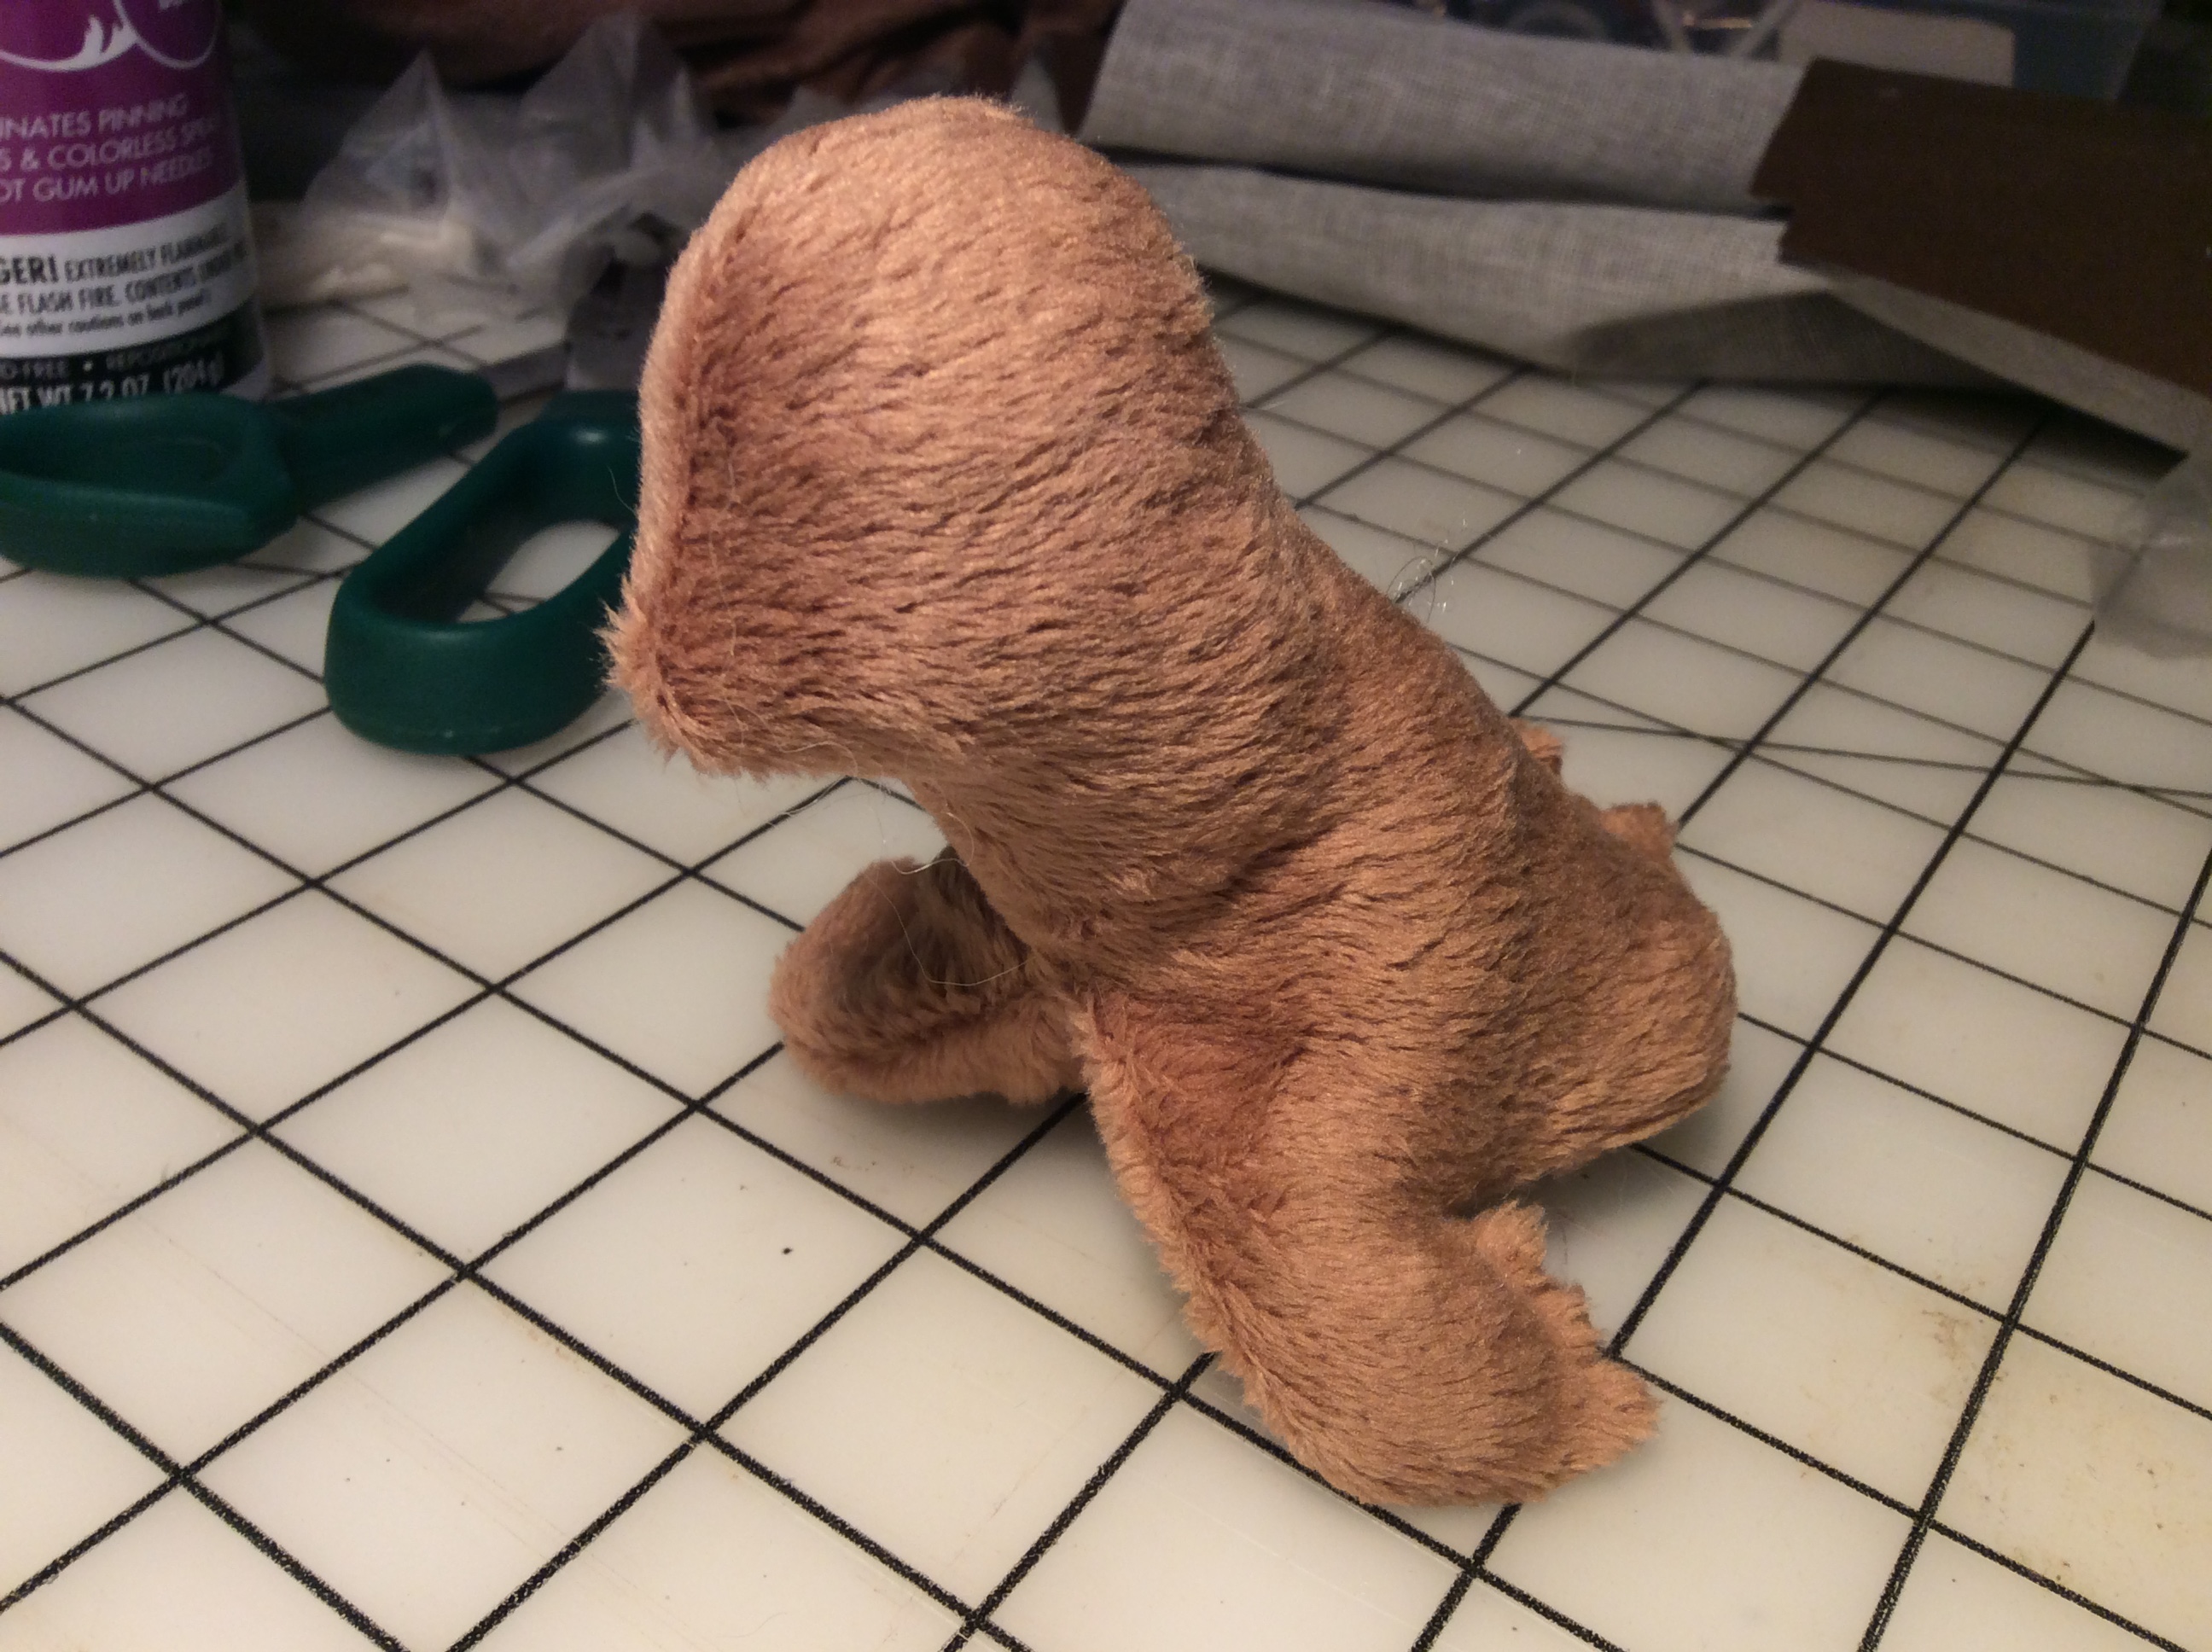 An eyeless plush seal with a too-long neck.